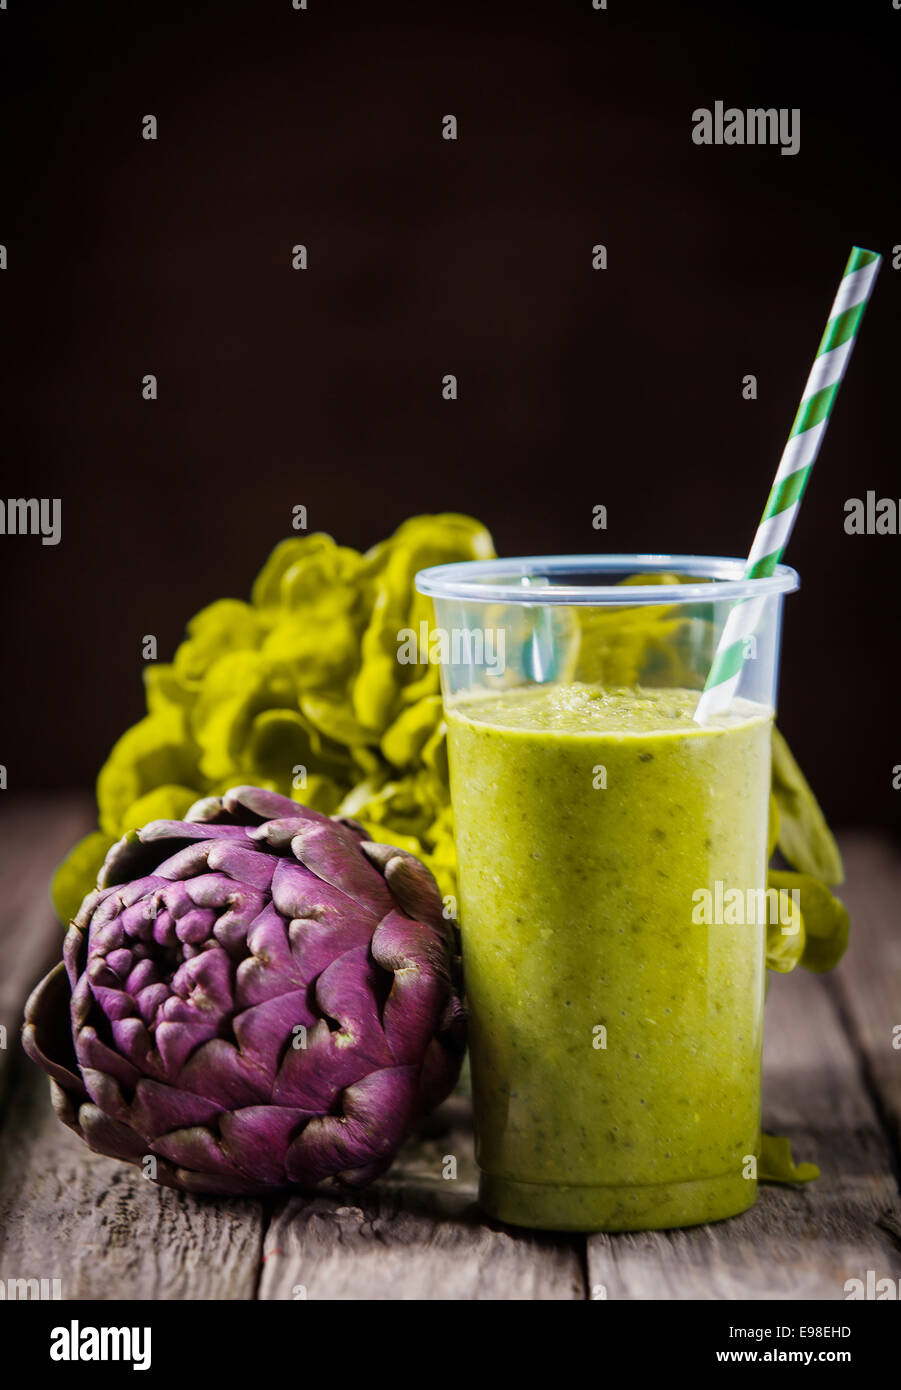 Healthy green artichoke smoothie blended with lettuce and yogurt and served with fresh ingredients on a wooden table over a dark background with copyspace Stock Photo